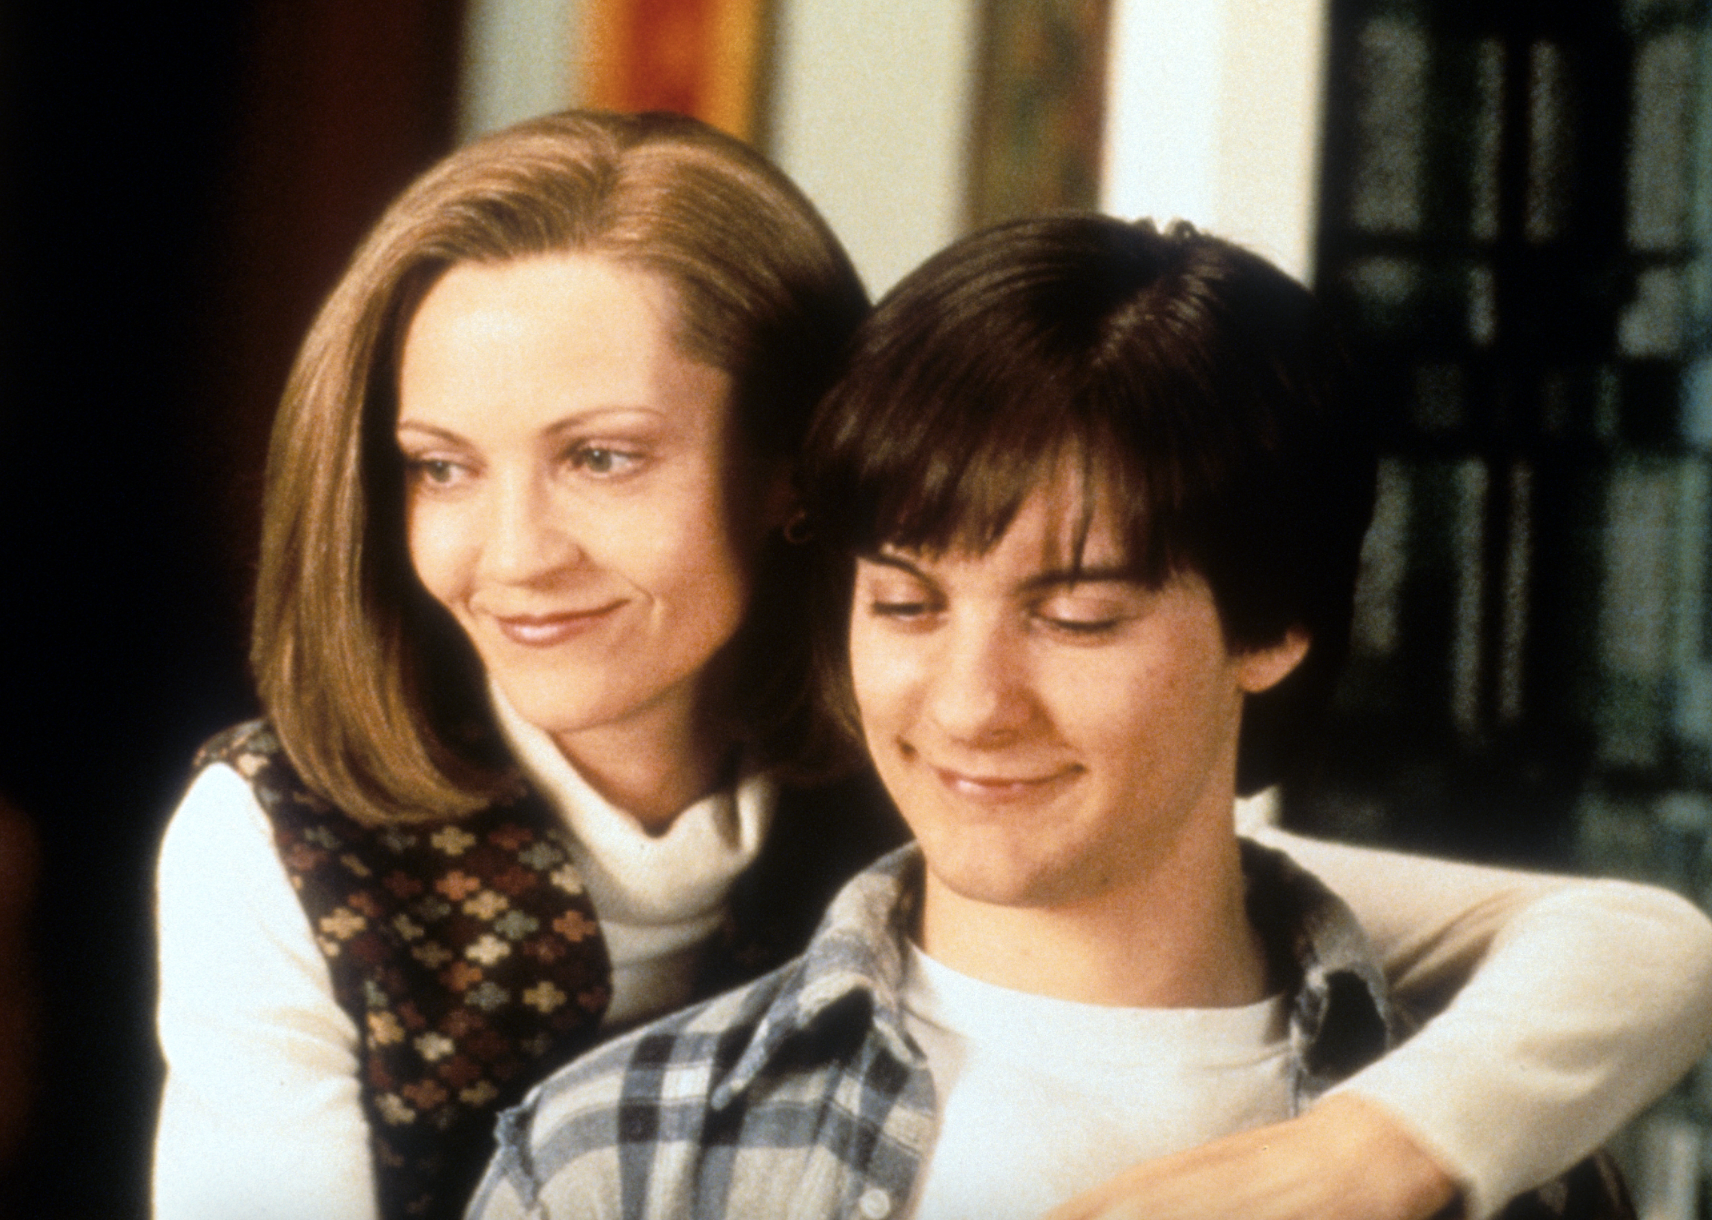 Joan Allen and Tobey Maguire in "The Ice Storm"